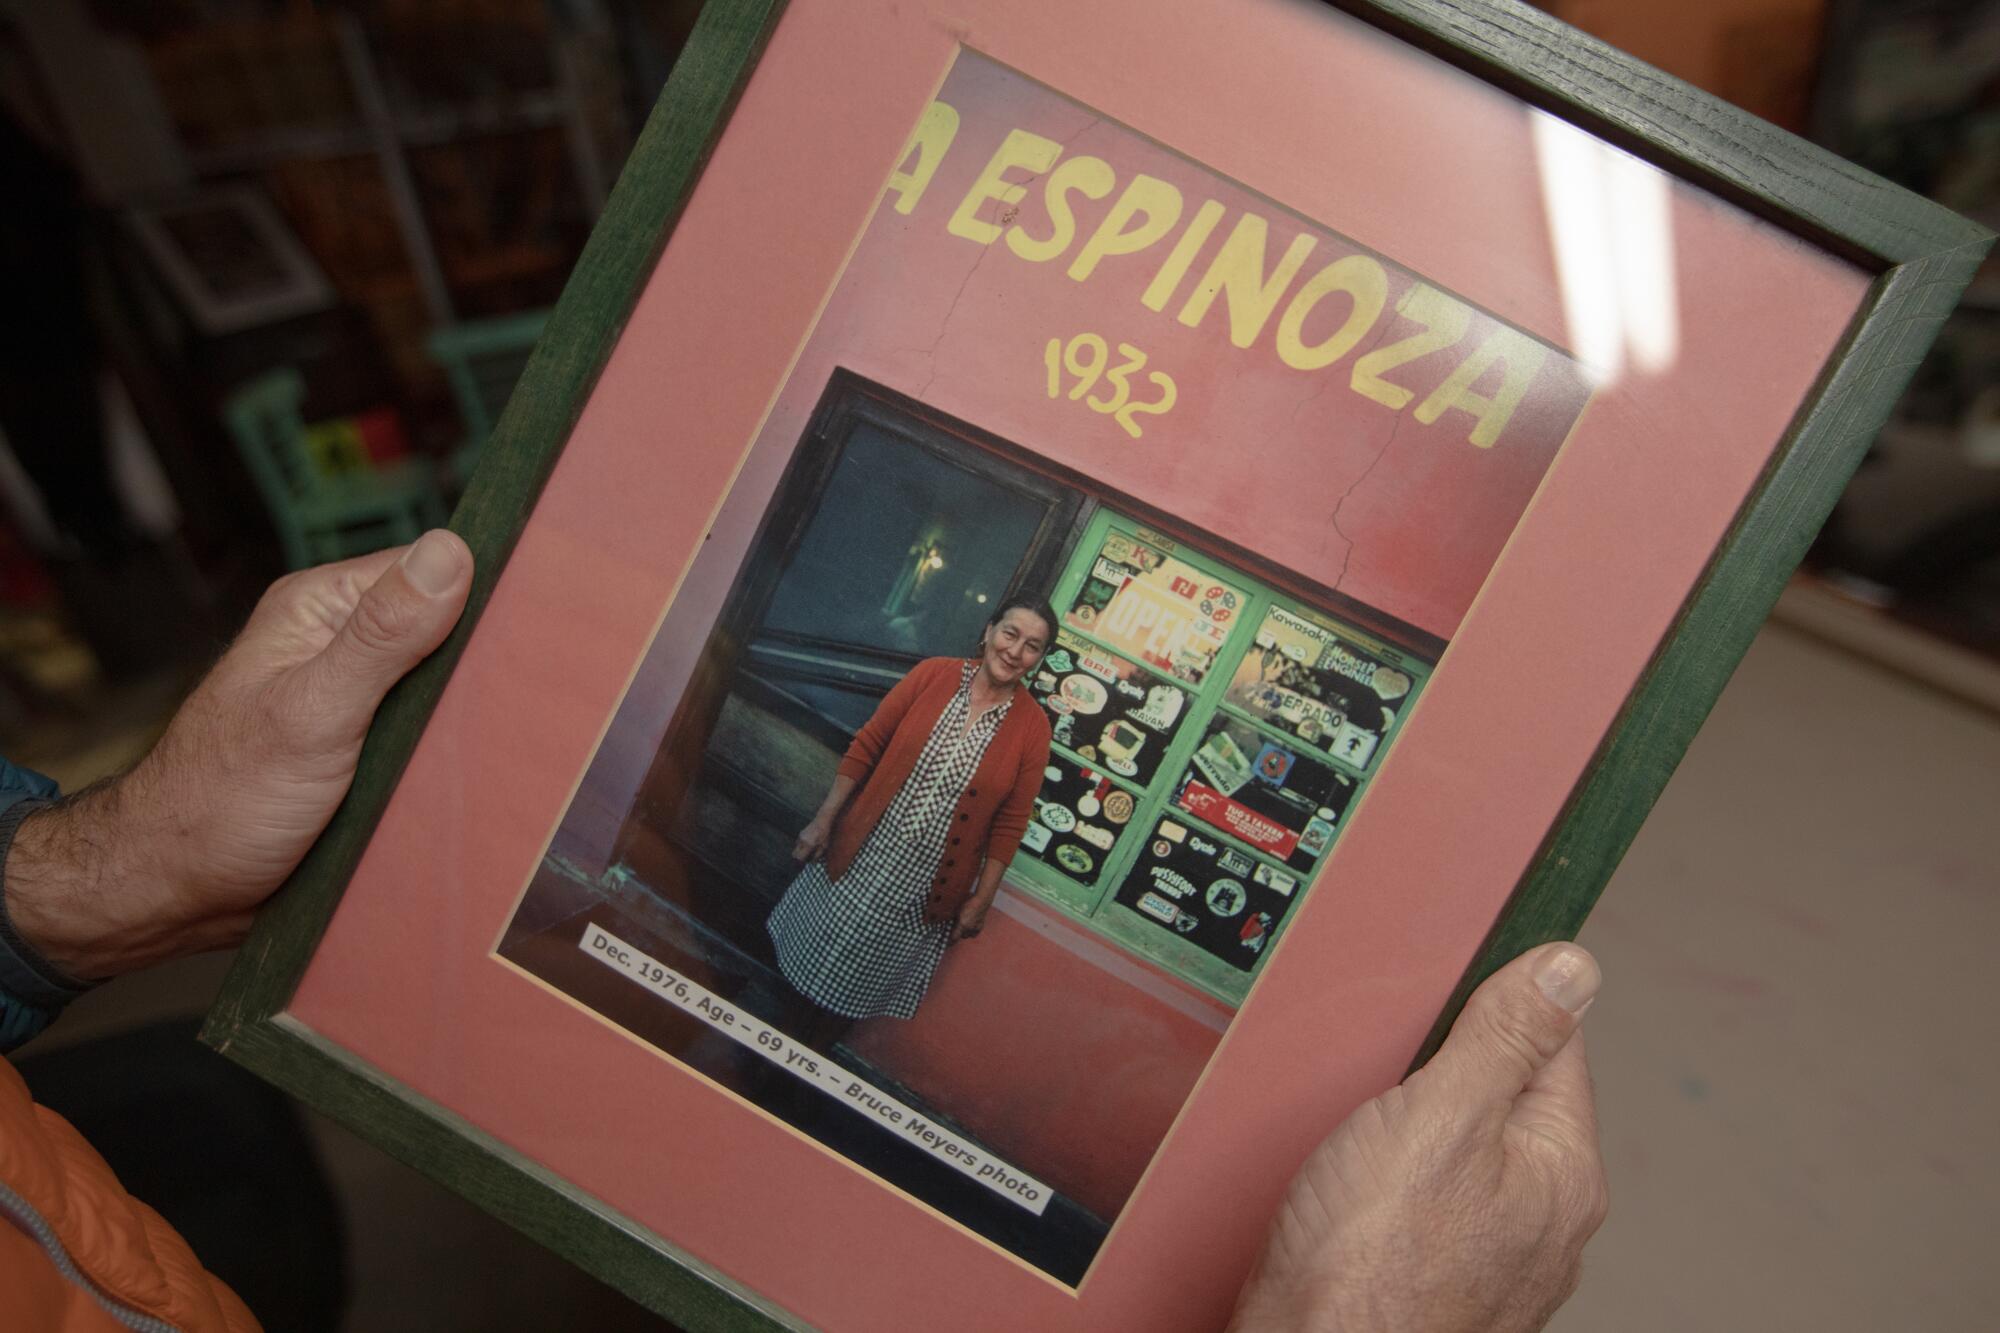 A pair of hands holding a frame photo of an older woman in front of a storefront, labeled "Mama Espinoza 1932".